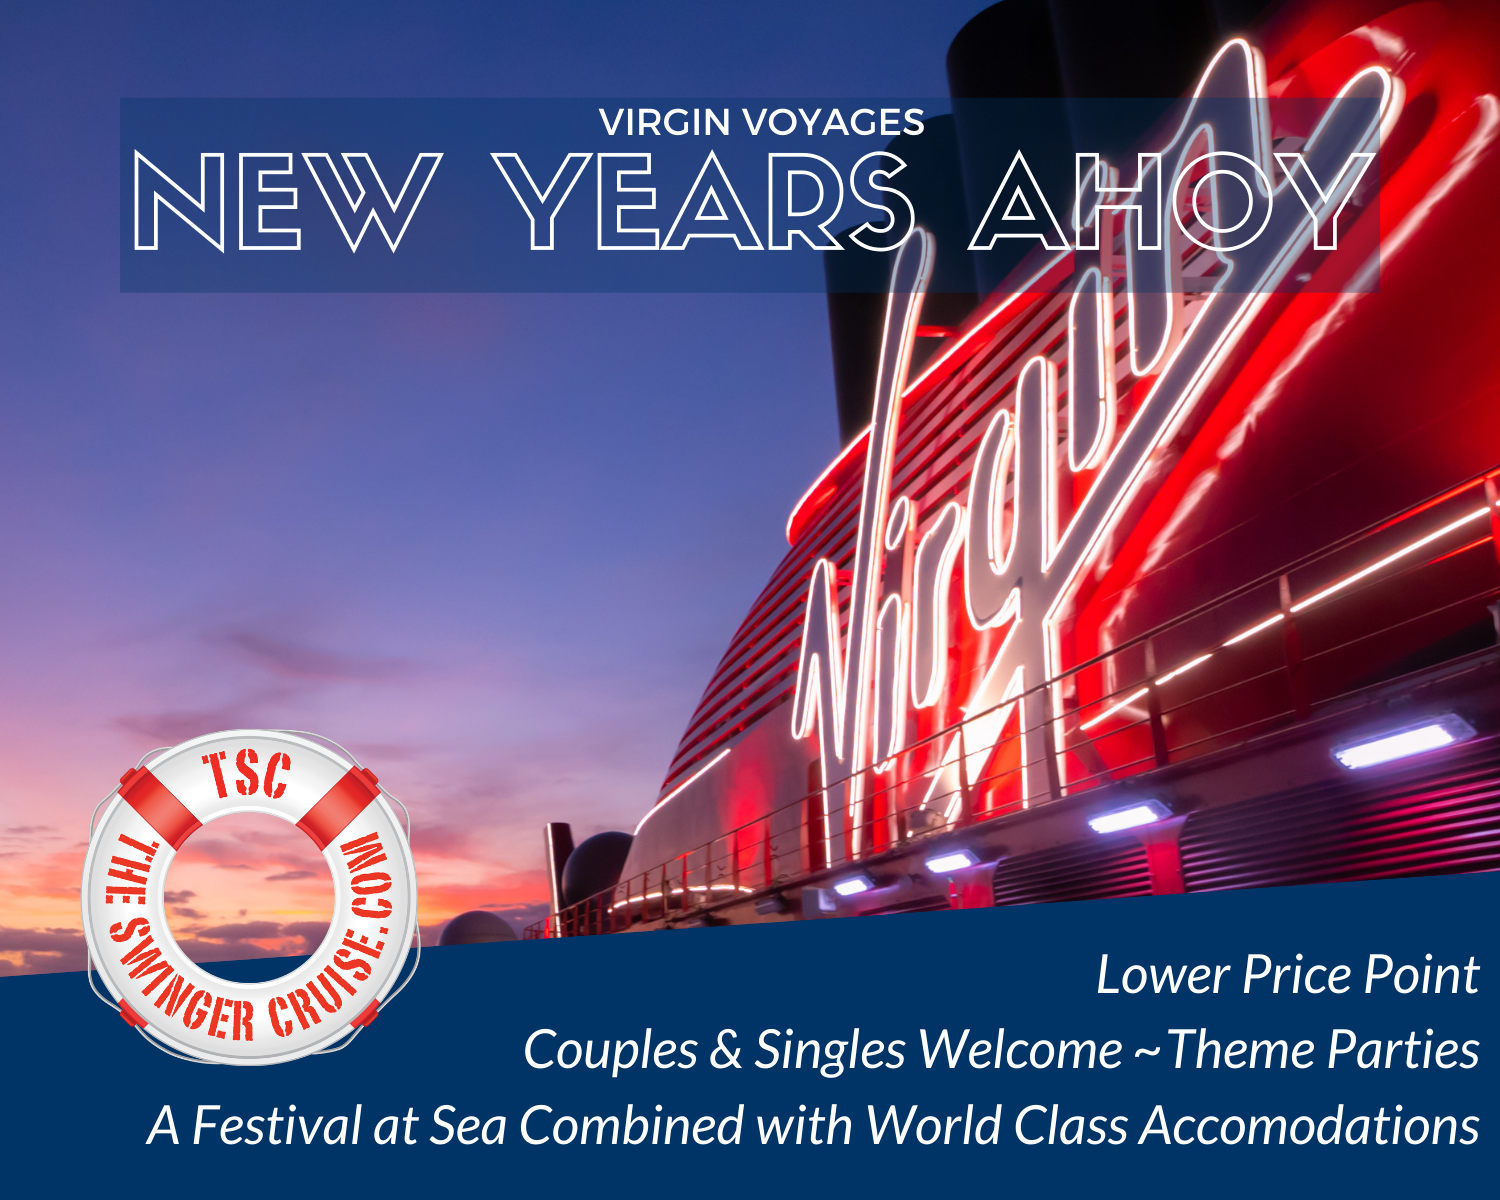 virgin voyages new years cruise